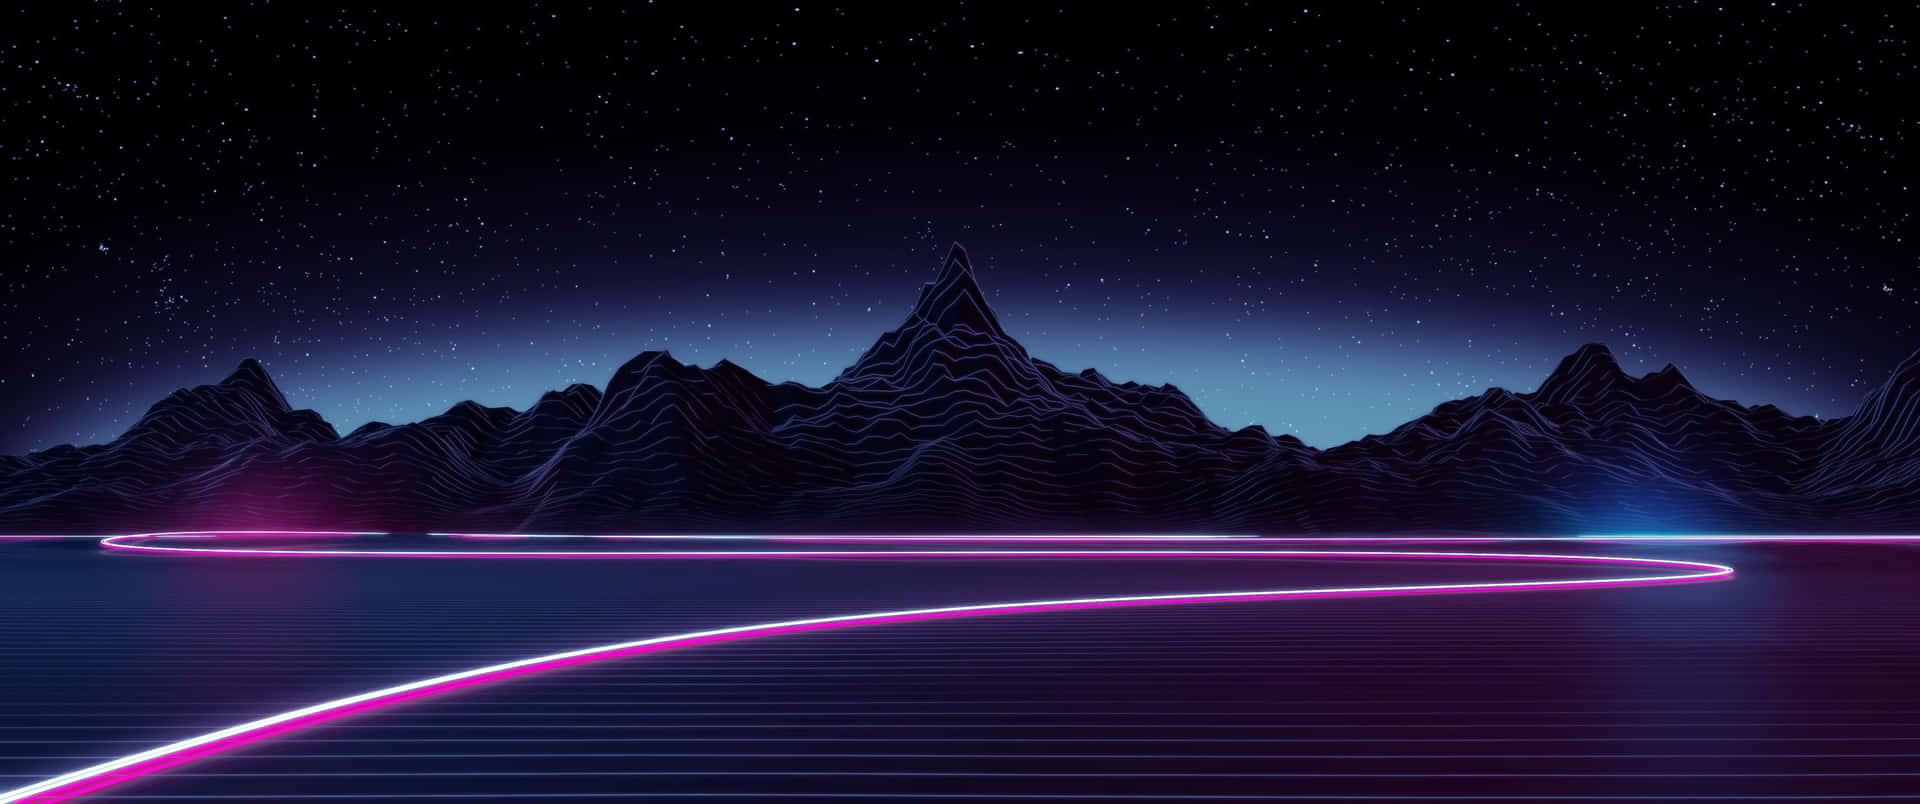 Upgrade your desktop and laptop with an aesthetic Tumblr wallpaper. Wallpaper